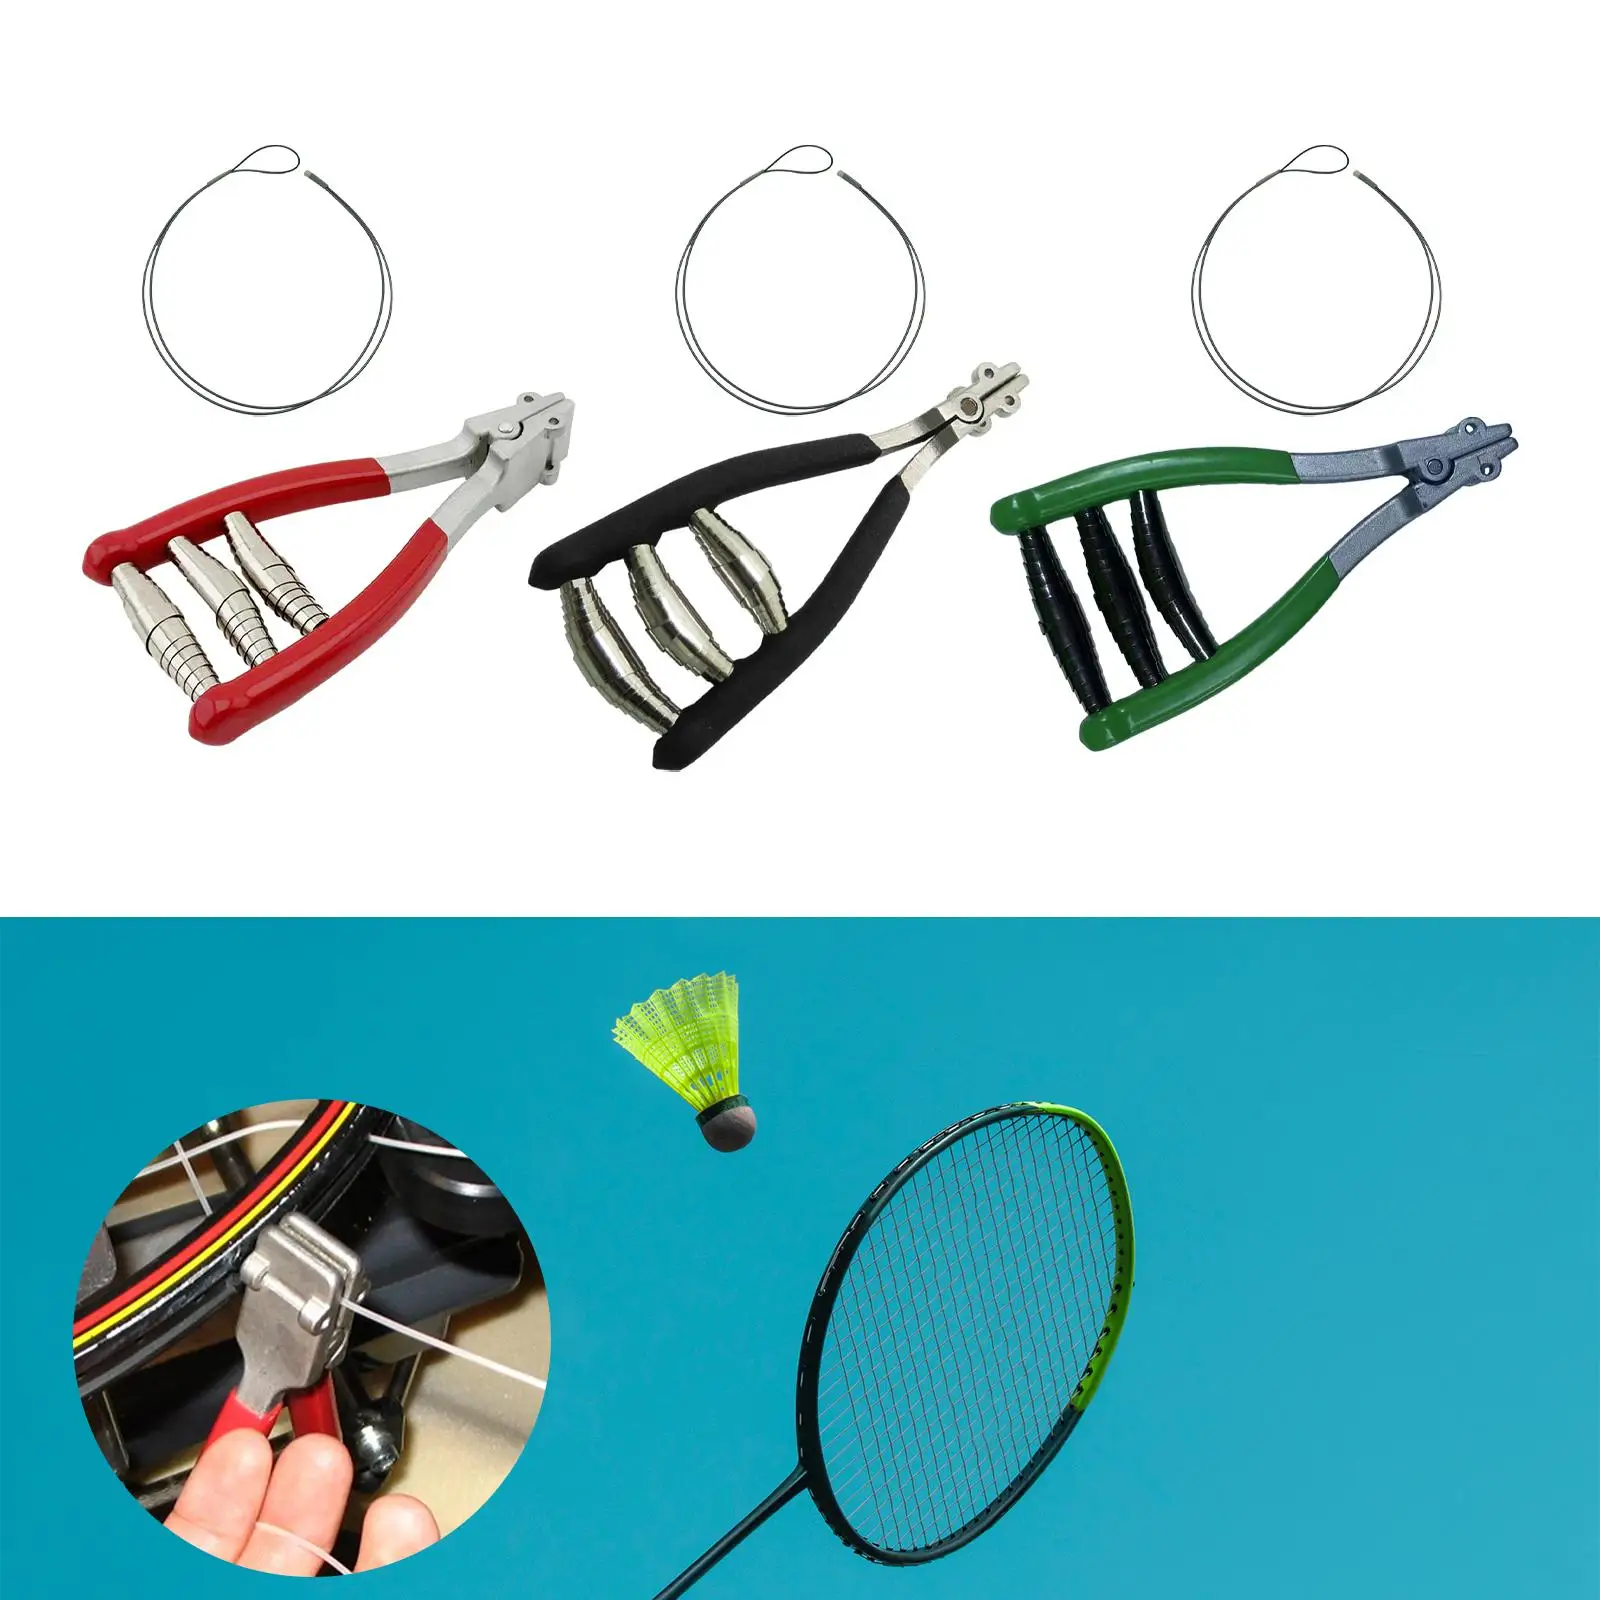 Starting Clamp Badminton Stringing Clamp Durable Wide Head Professional for Squash Tennis Racquet Badminton Racket Accessories